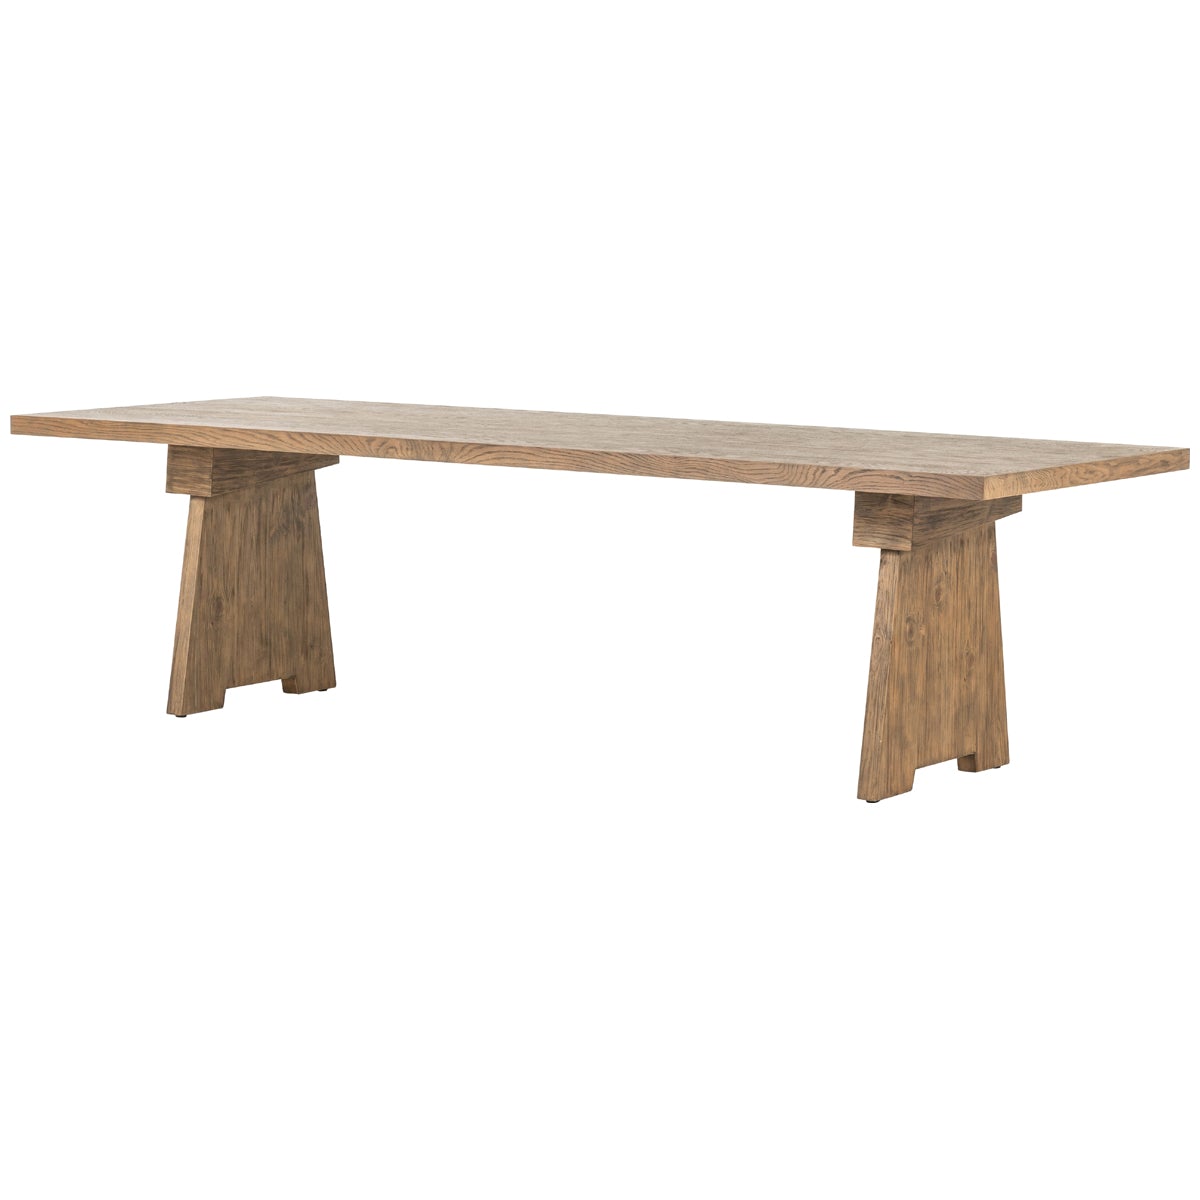 Four Hands Hughes Darnell Dining Table